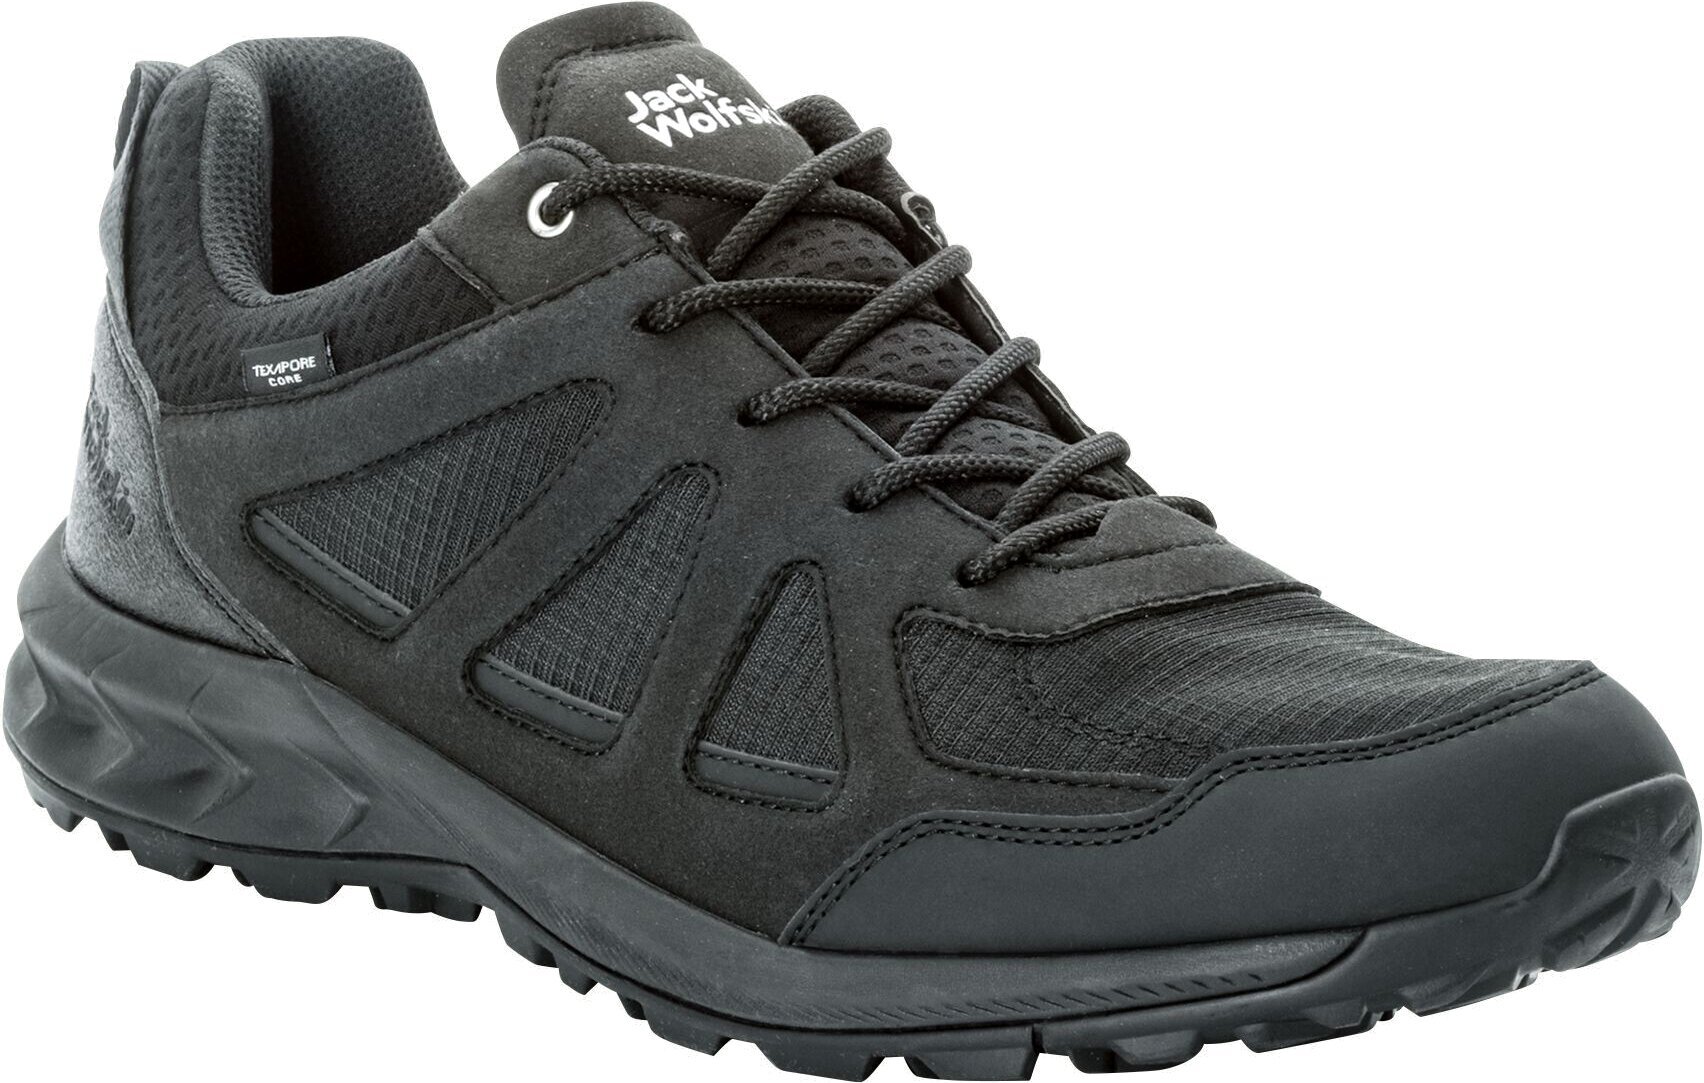 Mens Outdoor Shoes Jack Wolfskin Woodland 2 Texapore Low M Black 45 Mens Outdoor Shoes